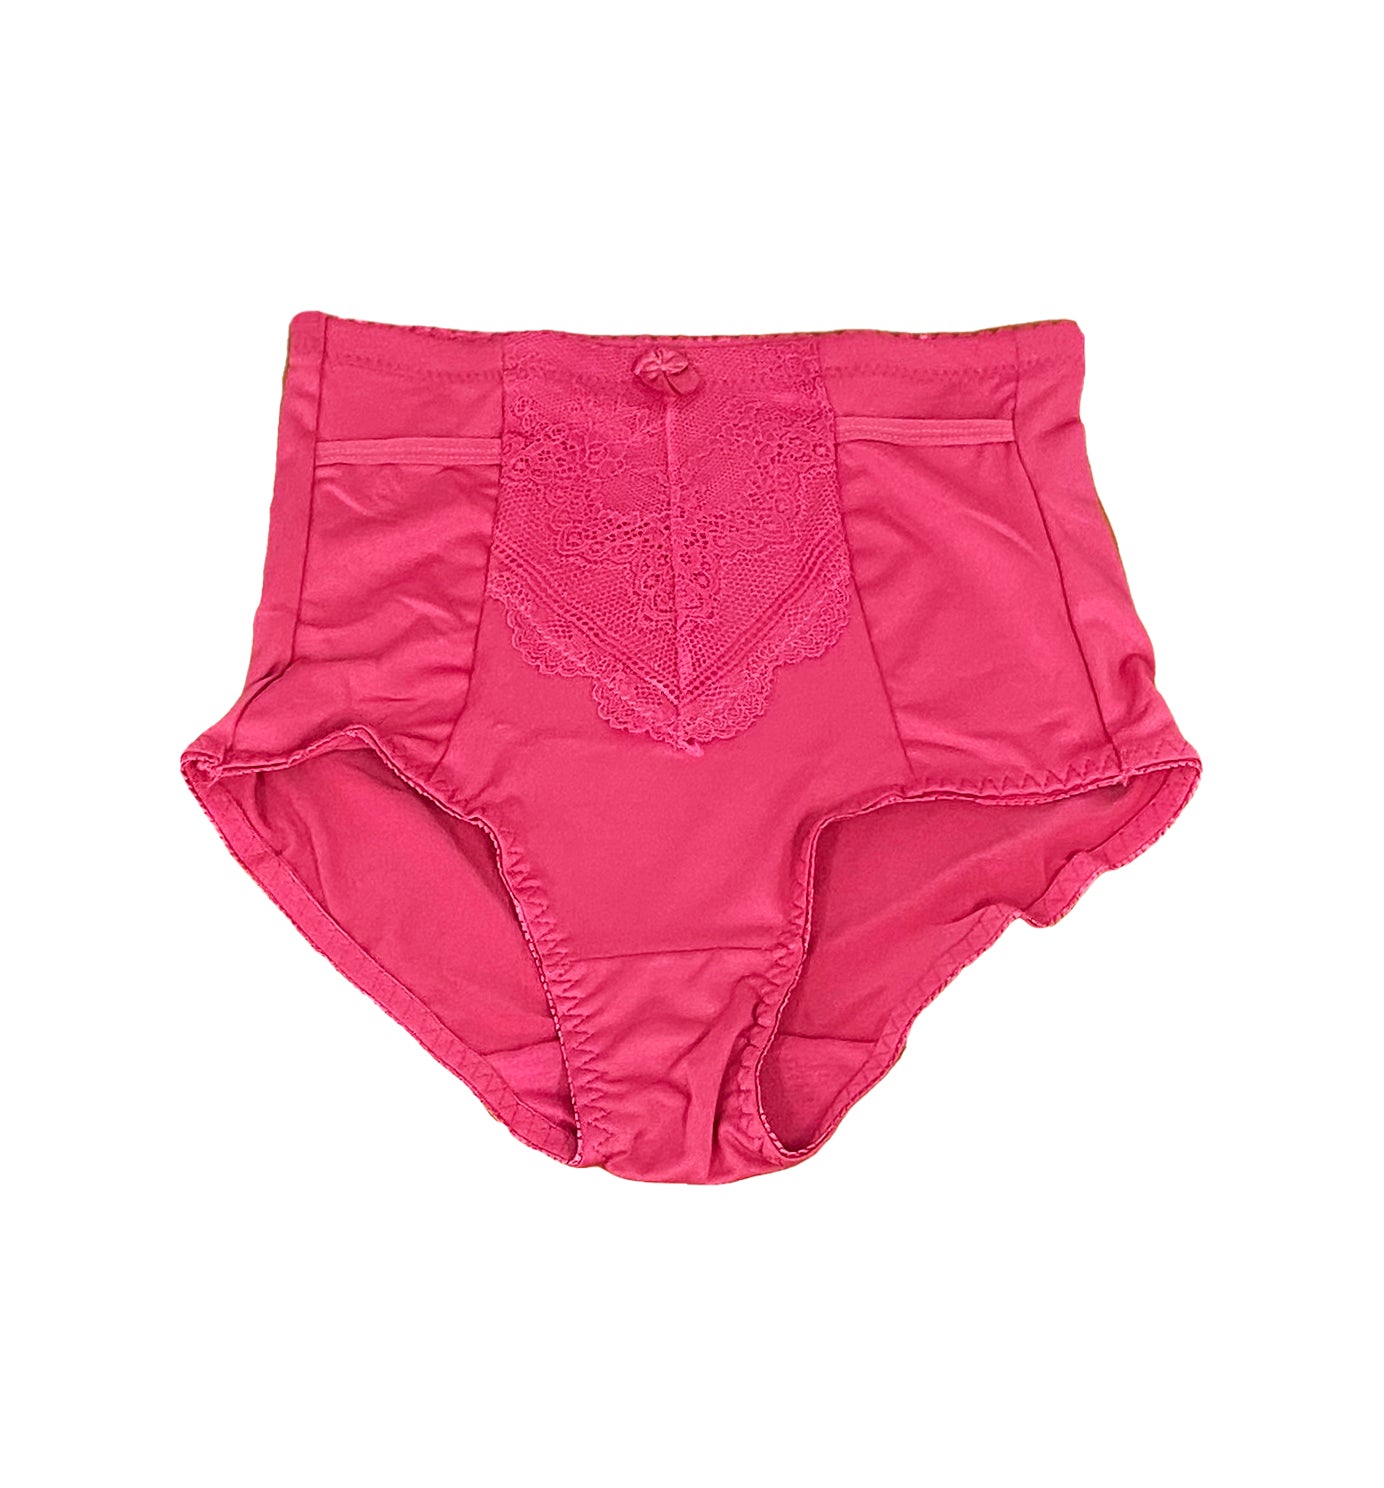 Only 3.99 usd for Dulce Donna, Panties Faja de Mujer Online at the